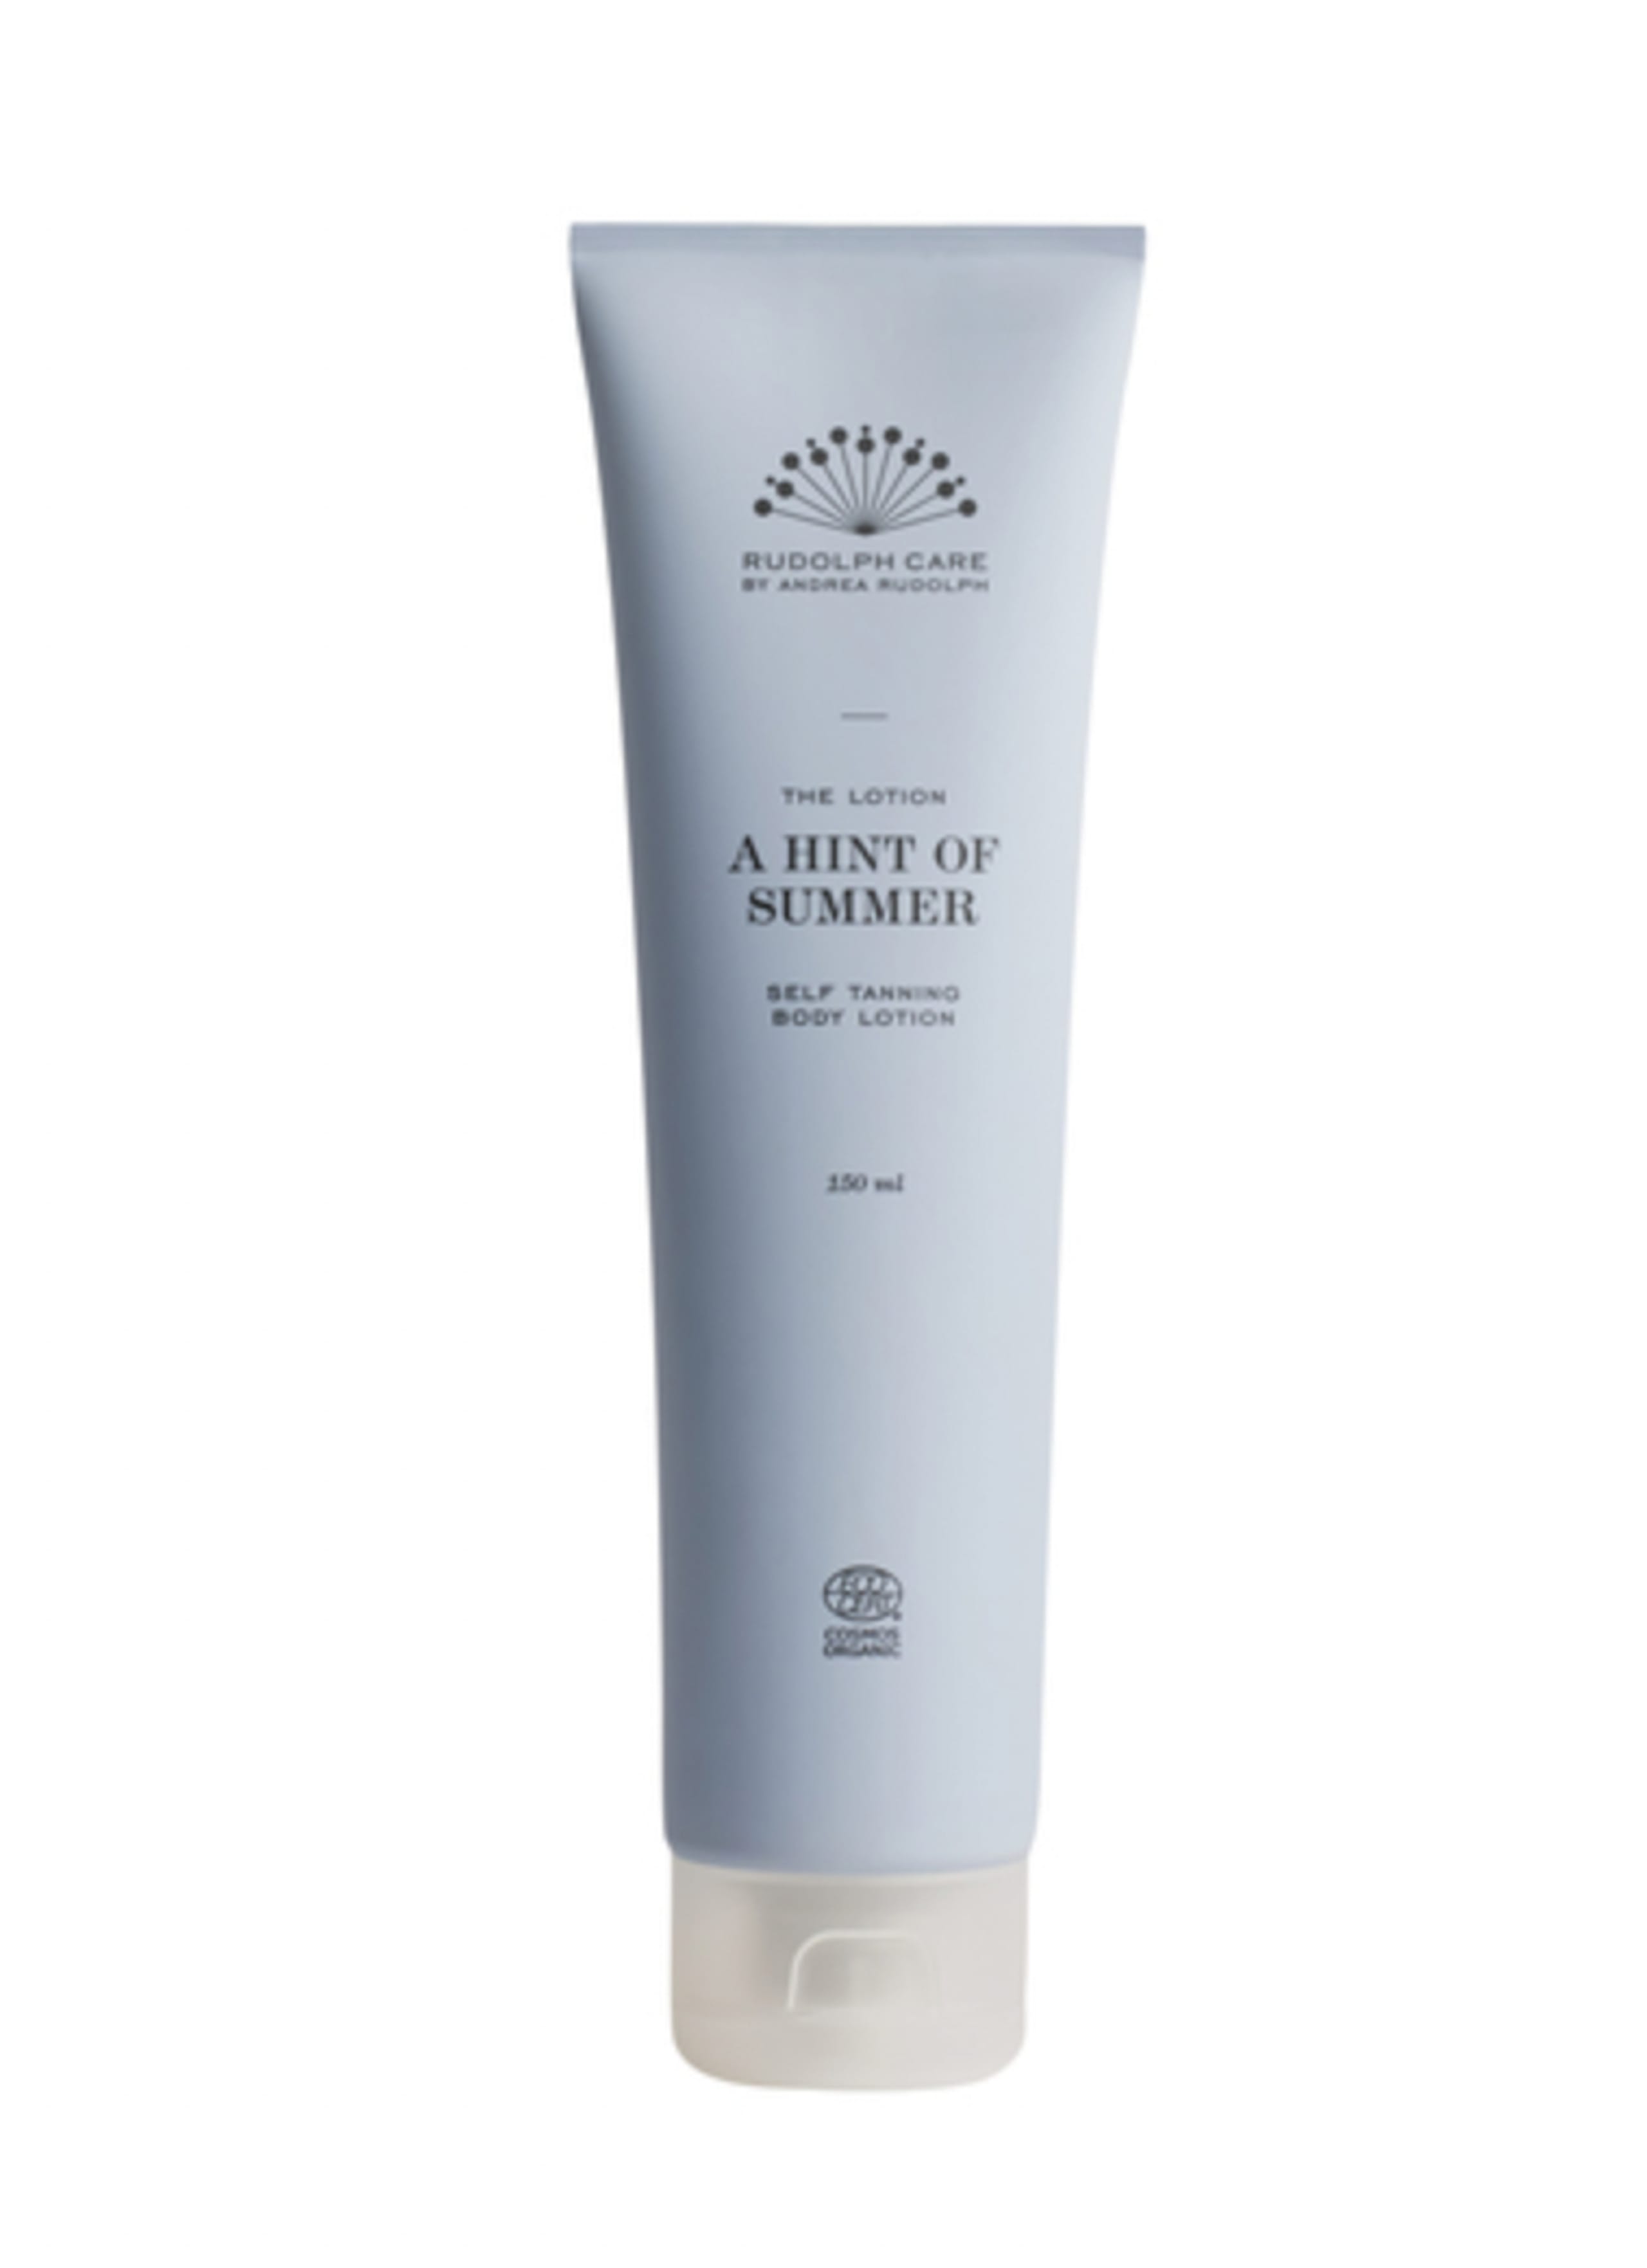 Rudolph Care - Selbstbräuner - Hint of Summer - The Lotion  - The Lotion